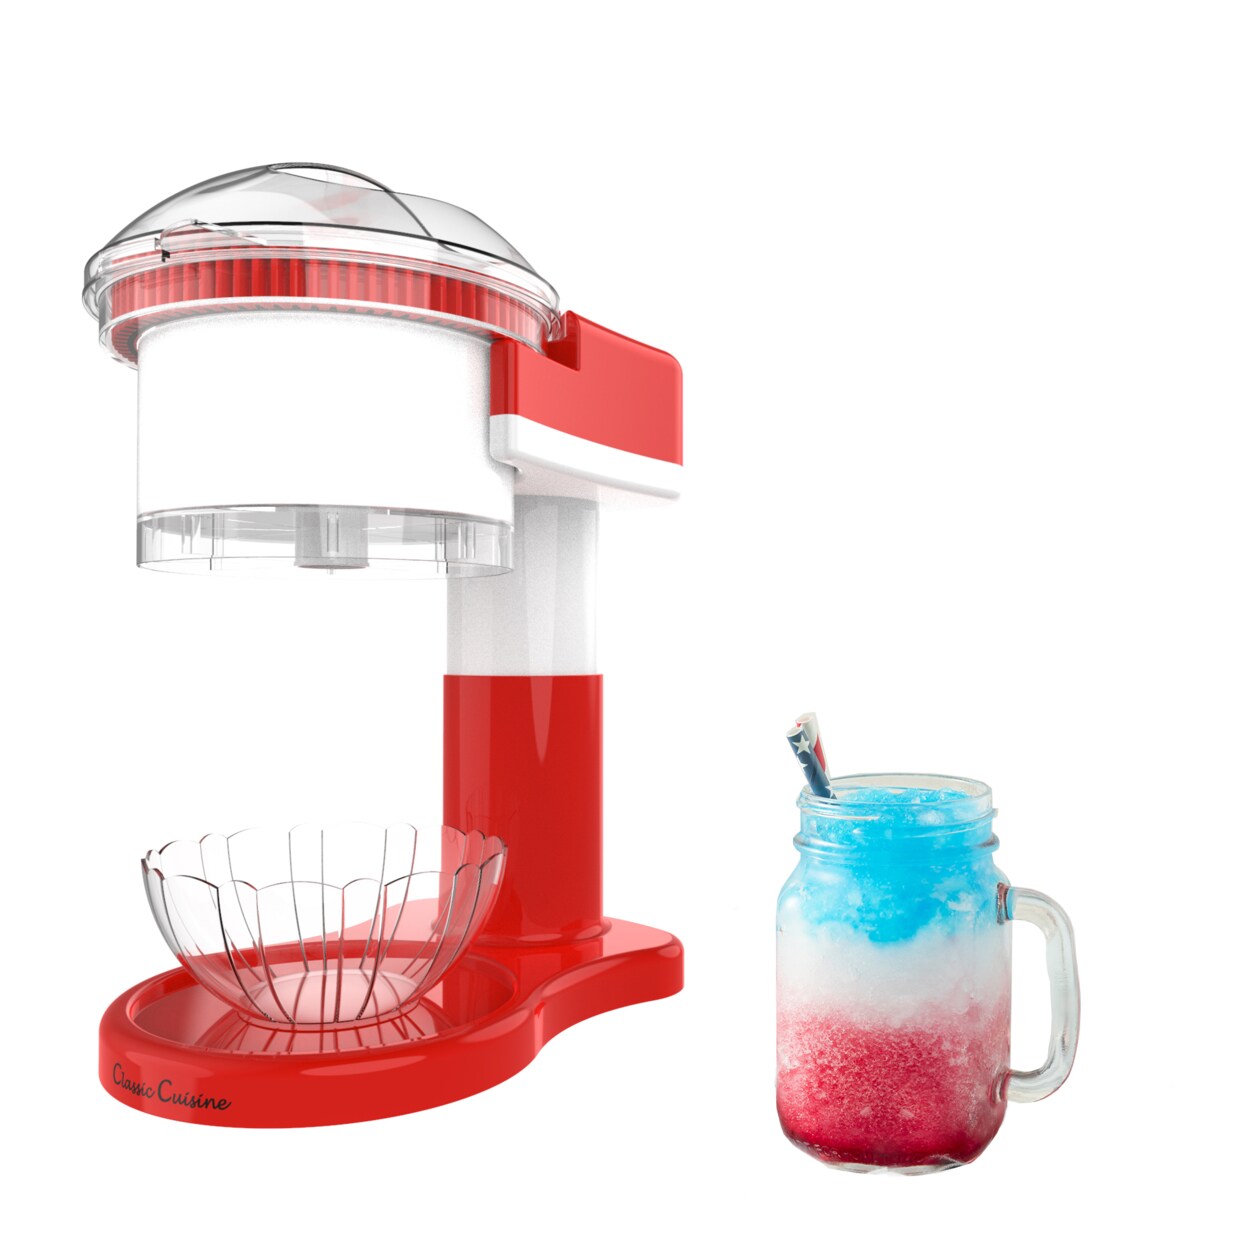 Classic Cuisine Shaved Ice Snow Cone Slushy Maker Use Ice Cubes Easy at Home Counter Top